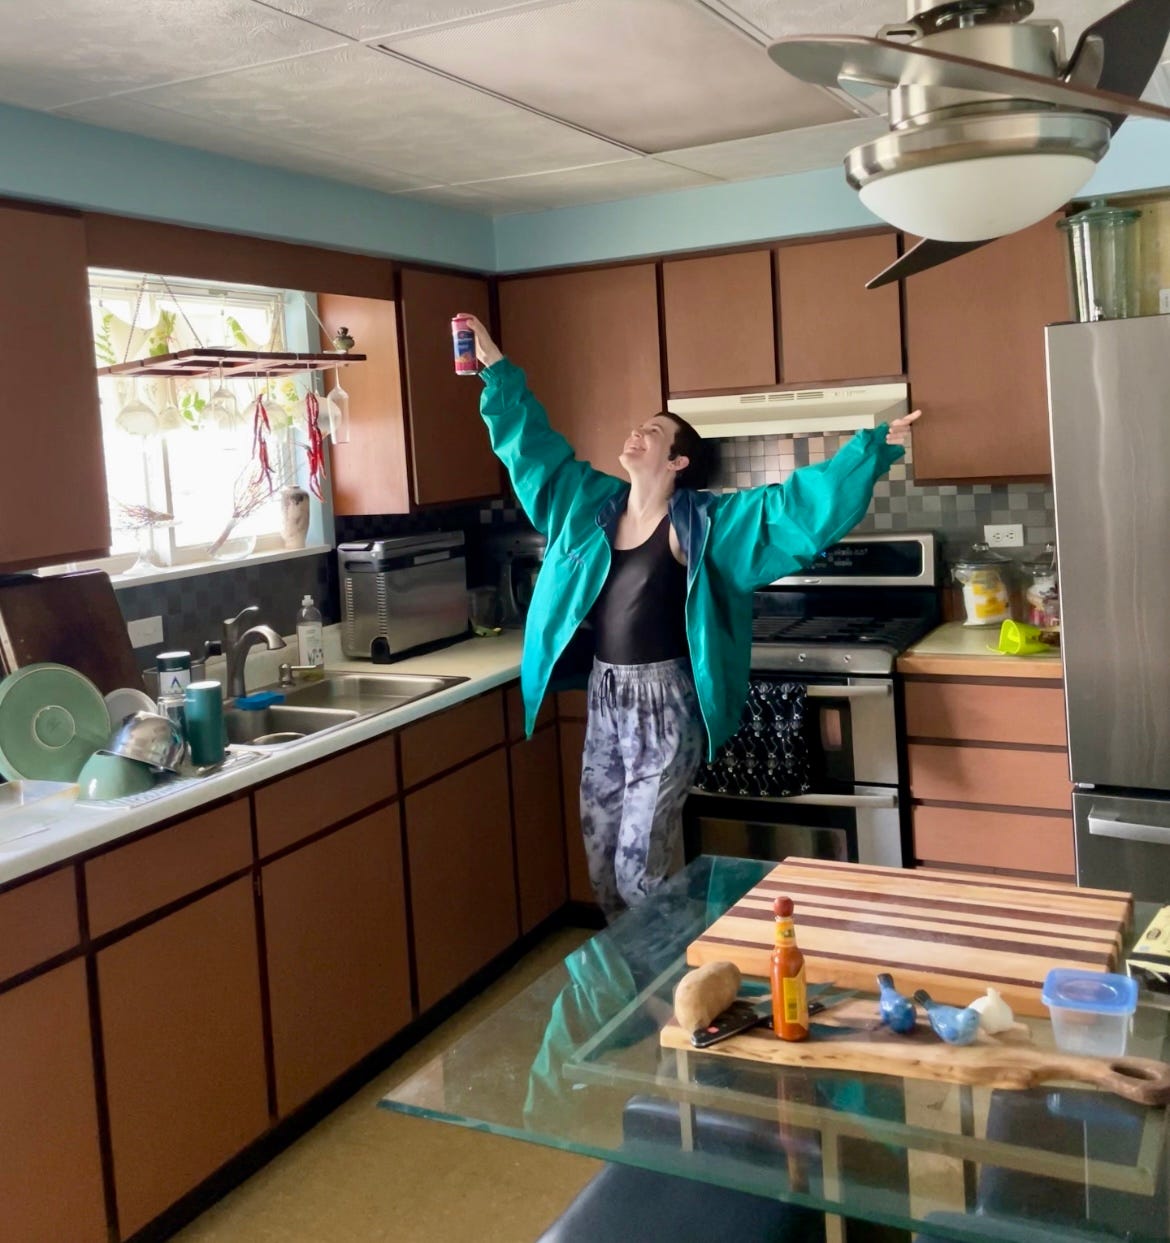 Photograph of Lyss in their kitchen with their arms in the air. They are smiling and dancing while wearing an 80s track jacket and gray sweatpants.